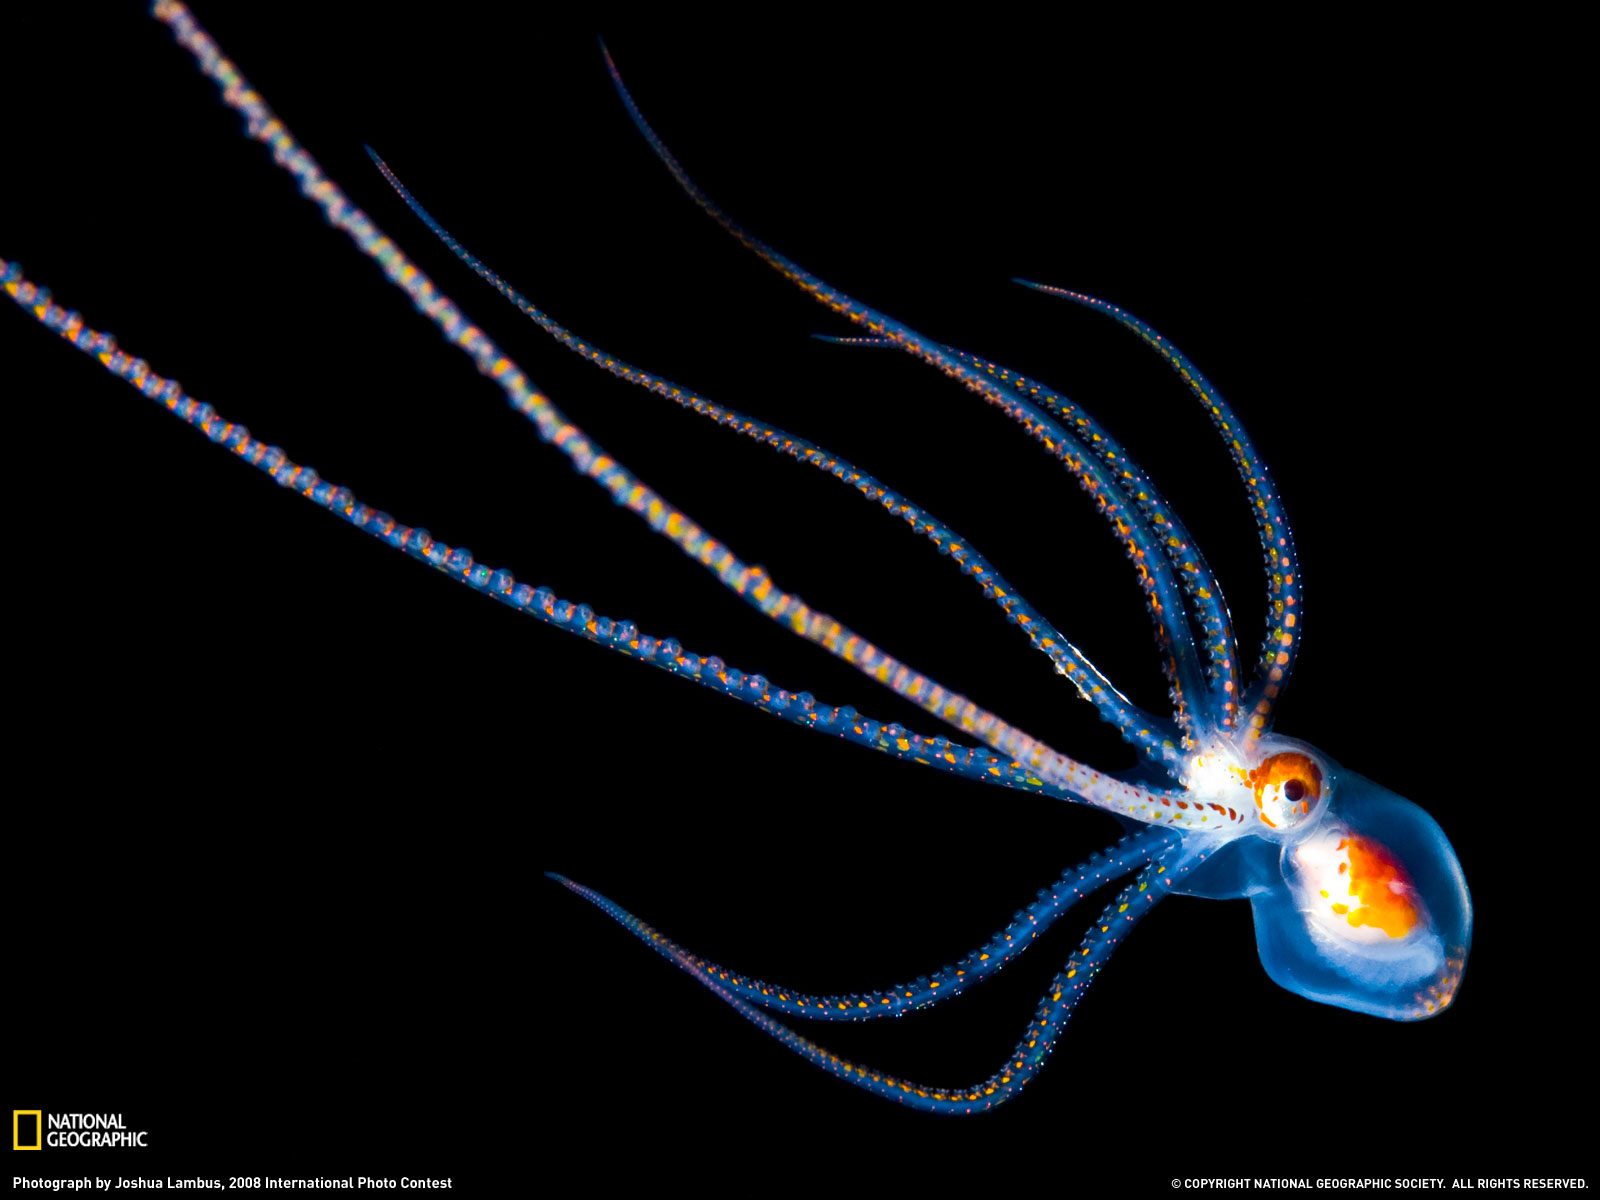 Octopus Photo Hawaii Wallpaper National Geographic Of The Day